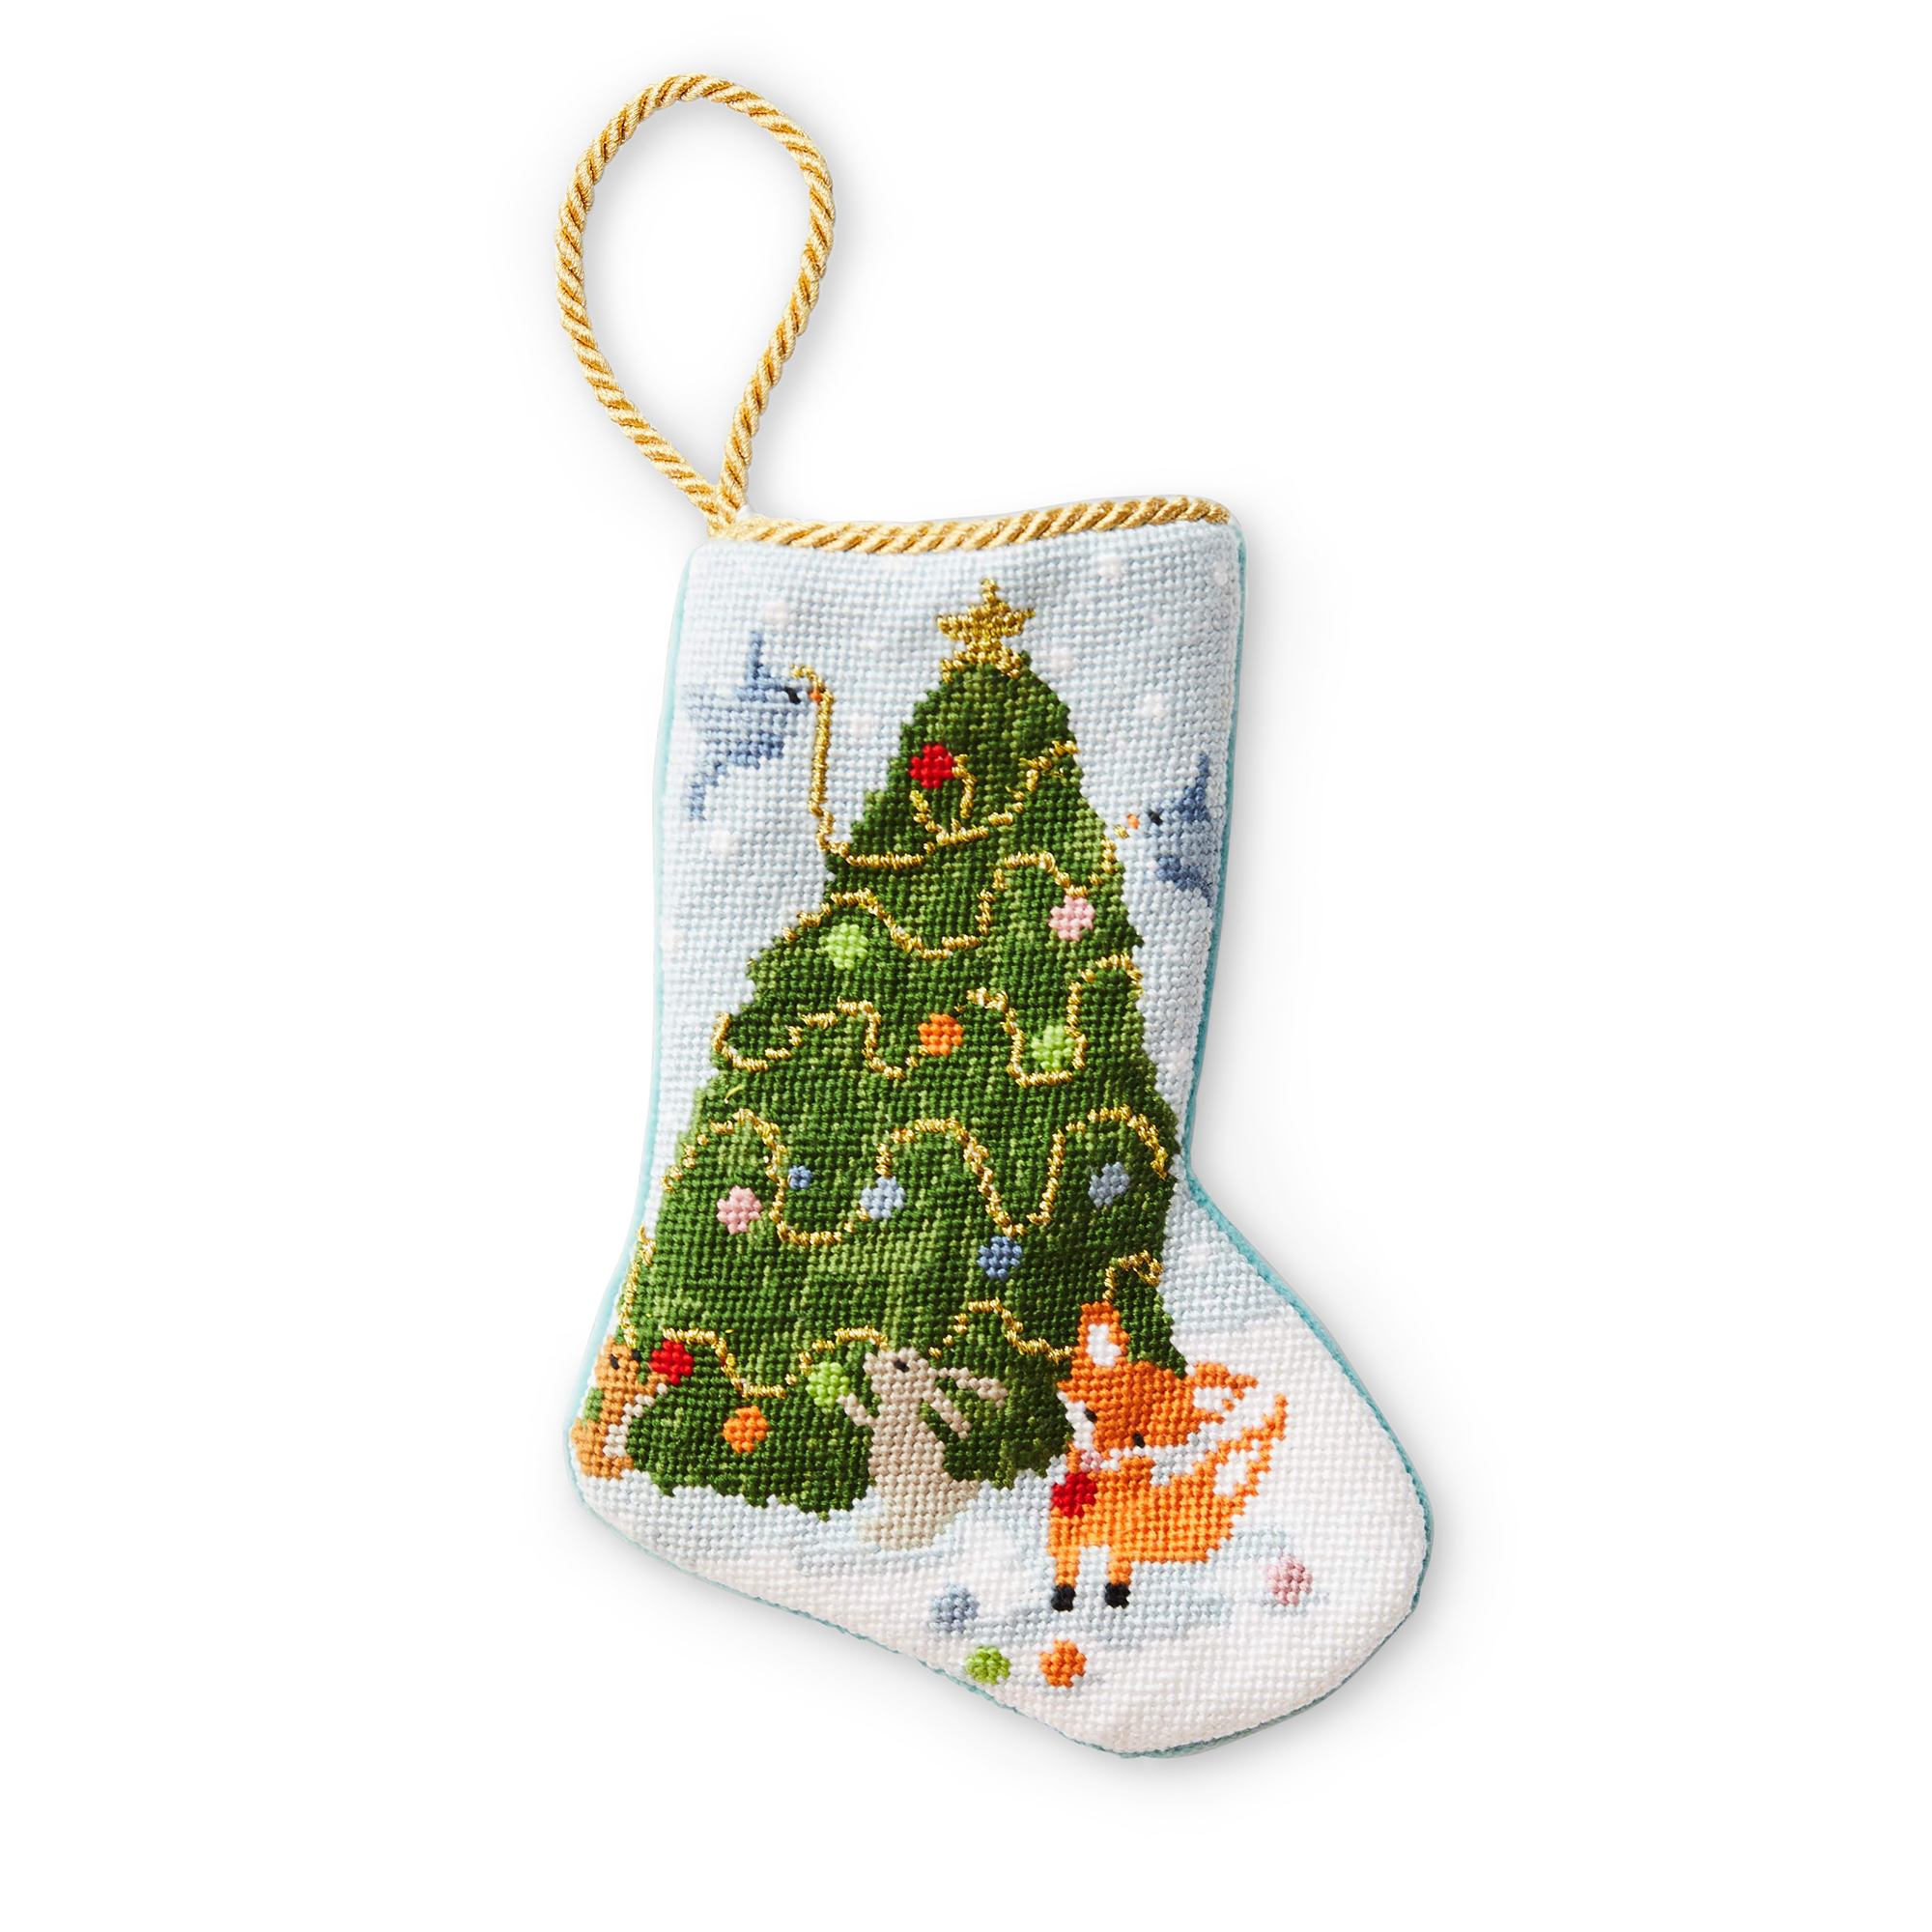 A charming Christmas stocking, featuring an illustrated Christmas tree and animals around it in a warm holiday scene. A gold loop at the top, is making it perfect as tree ornament, place setting, or for hanging by the fireplace.